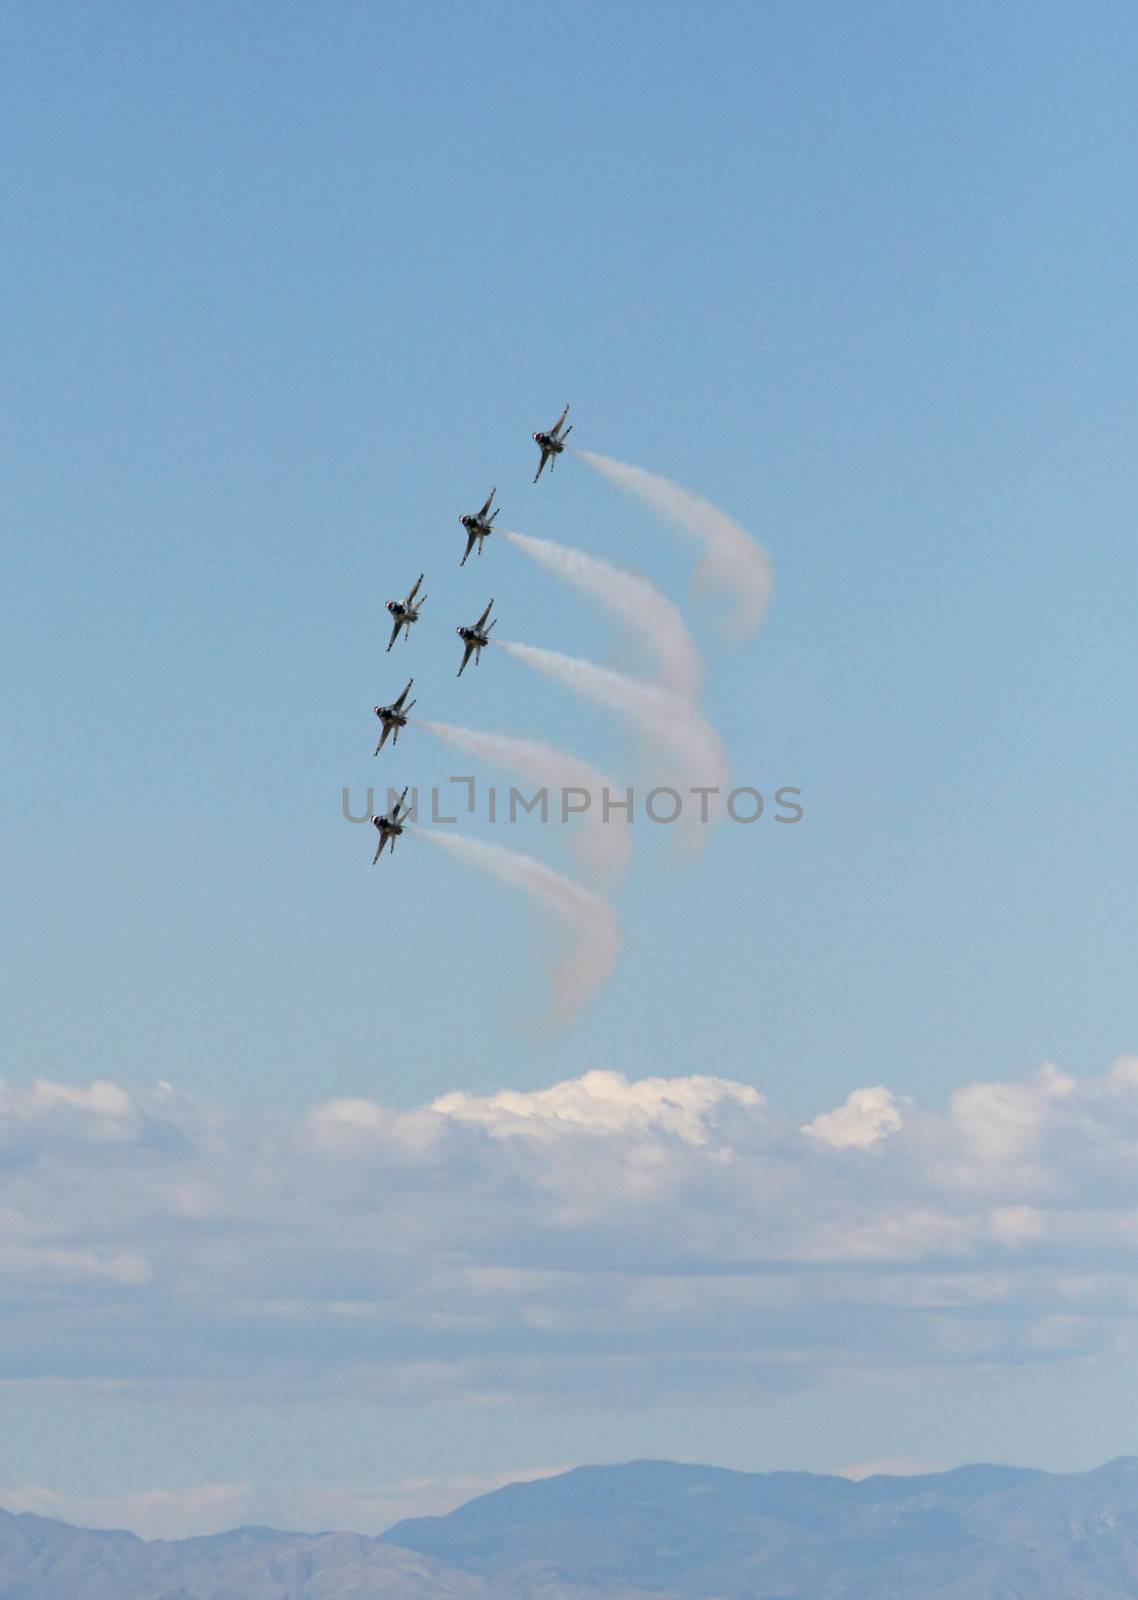 Six fighter jets flying in formation against a clear blue sky